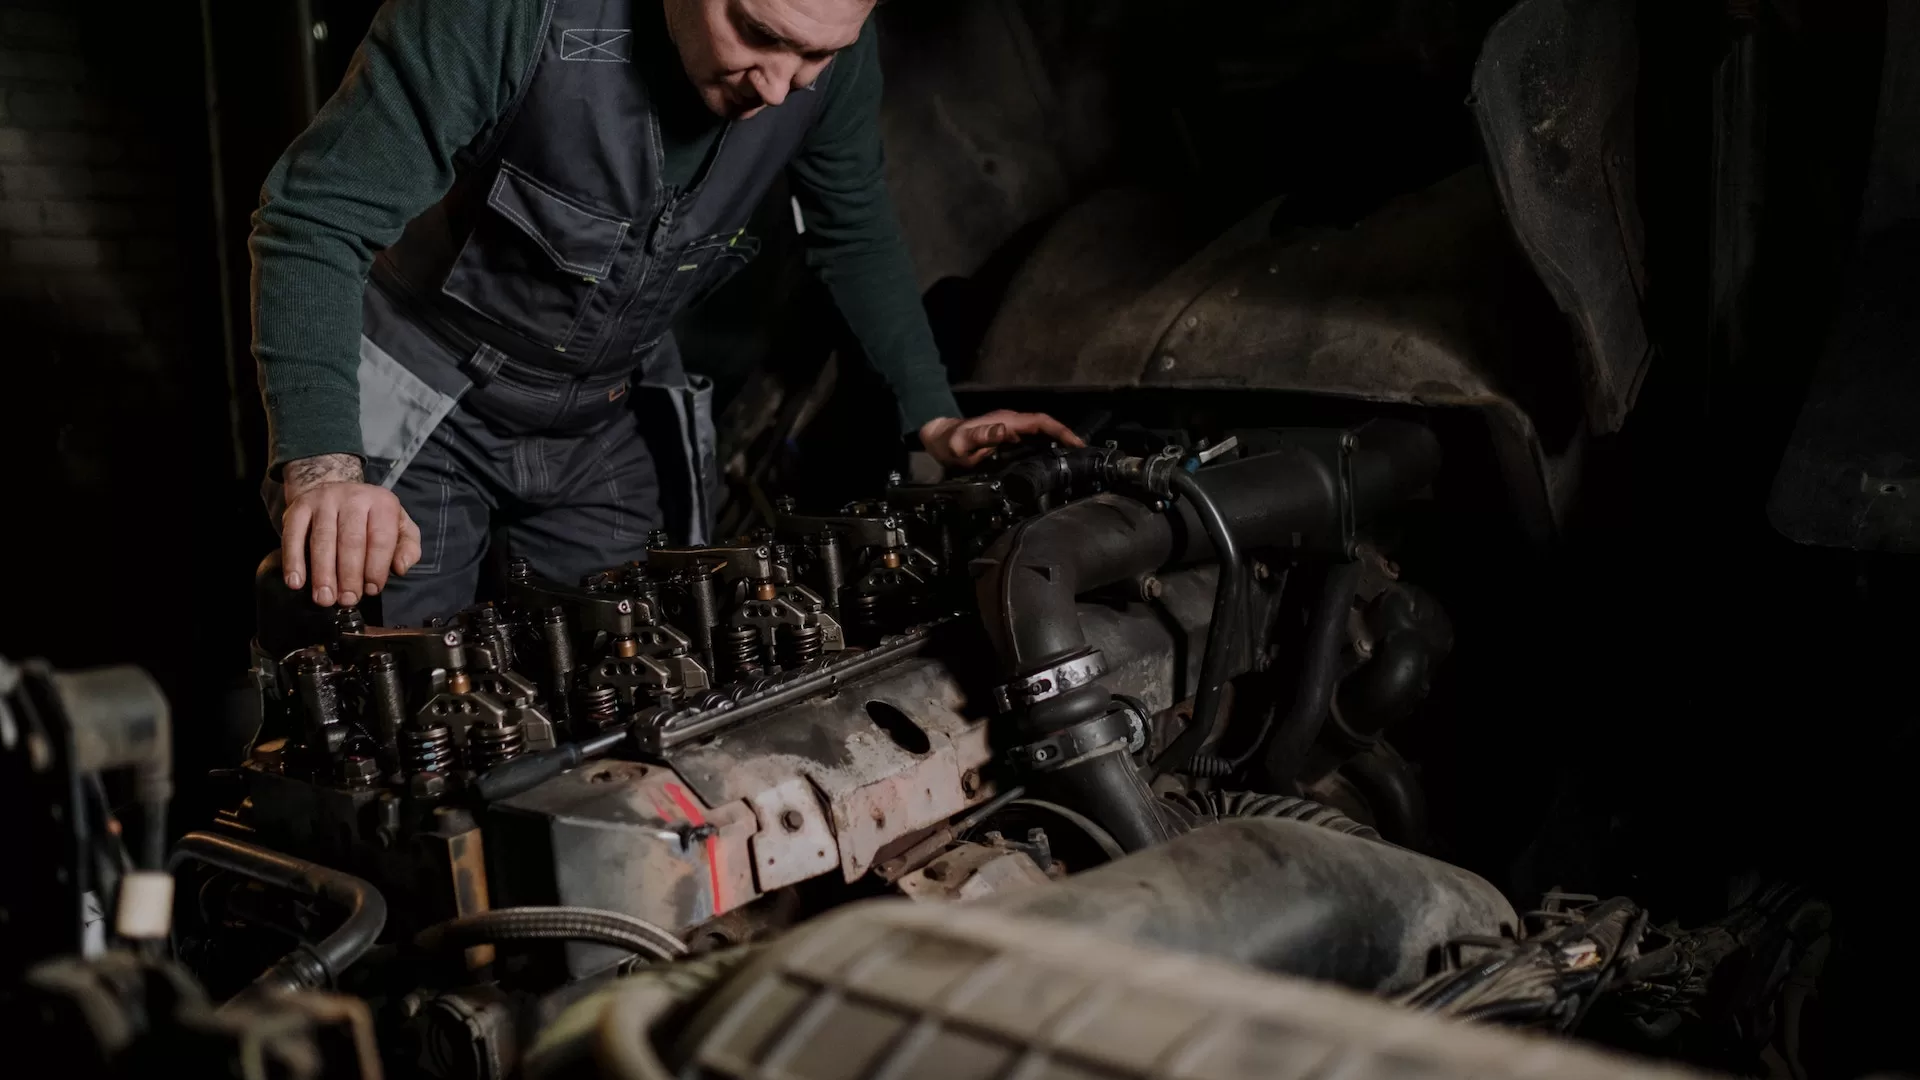 Image of a person repairing a truck engine to denote truck engine spare parts